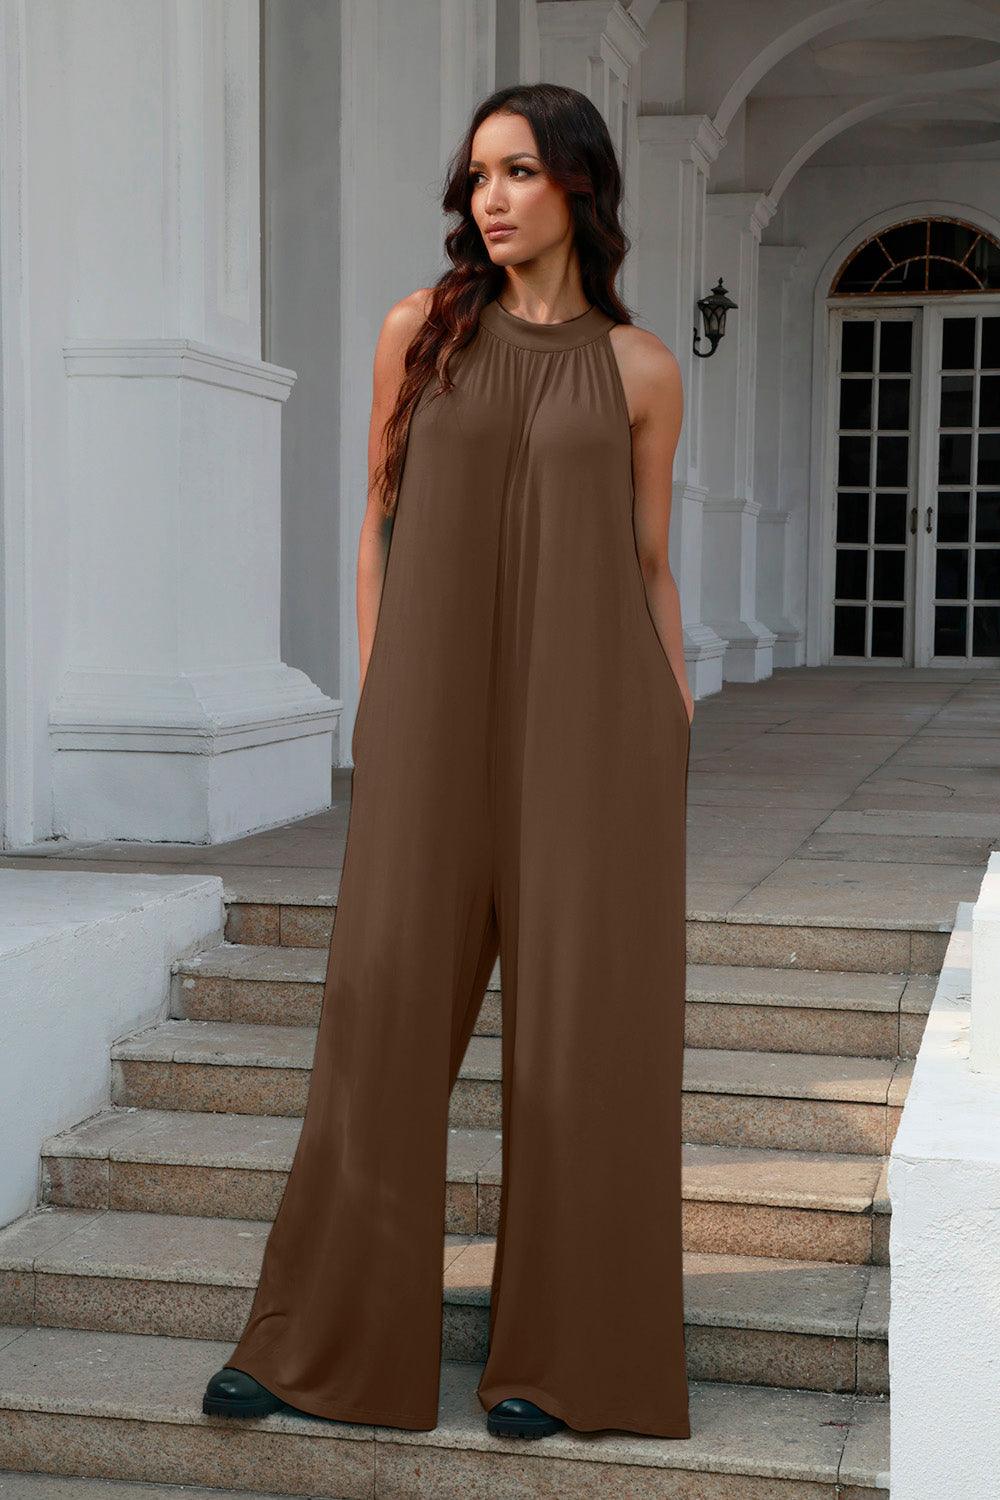 Double Take Full Size Tie Back Cutout Sleeveless Jumpsuit - God's Girl Gifts And Apparel